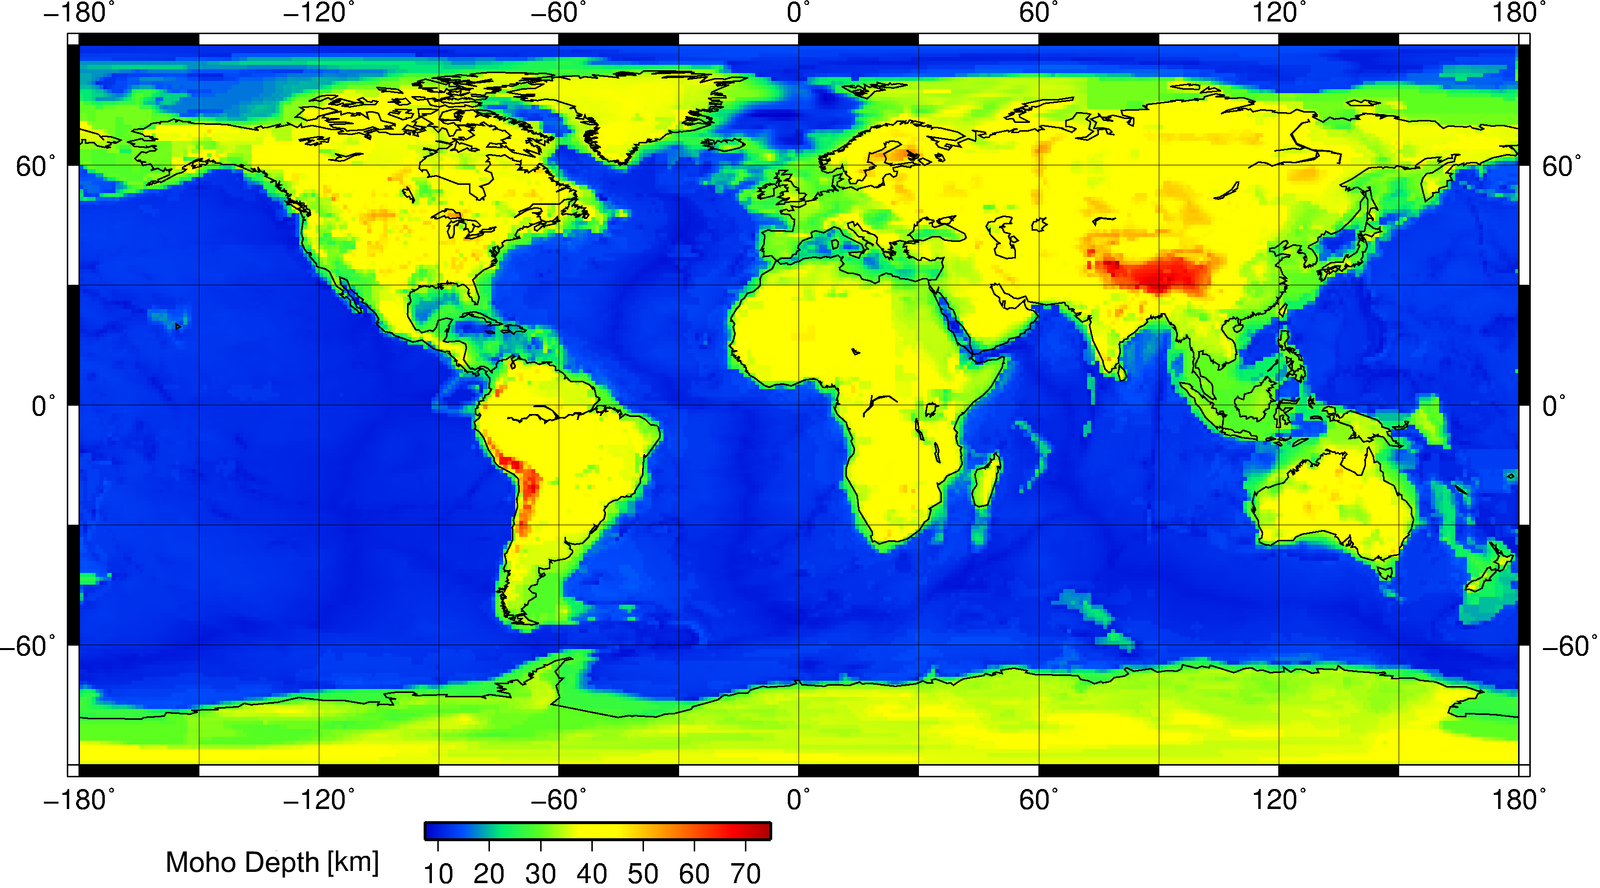 World map with the Moho depth color coded on the map: red is the deepest while blue is the shallowest. The Moho is deepest under central Asia and western South America, and the Moho is shallowest under the world ocean basins.